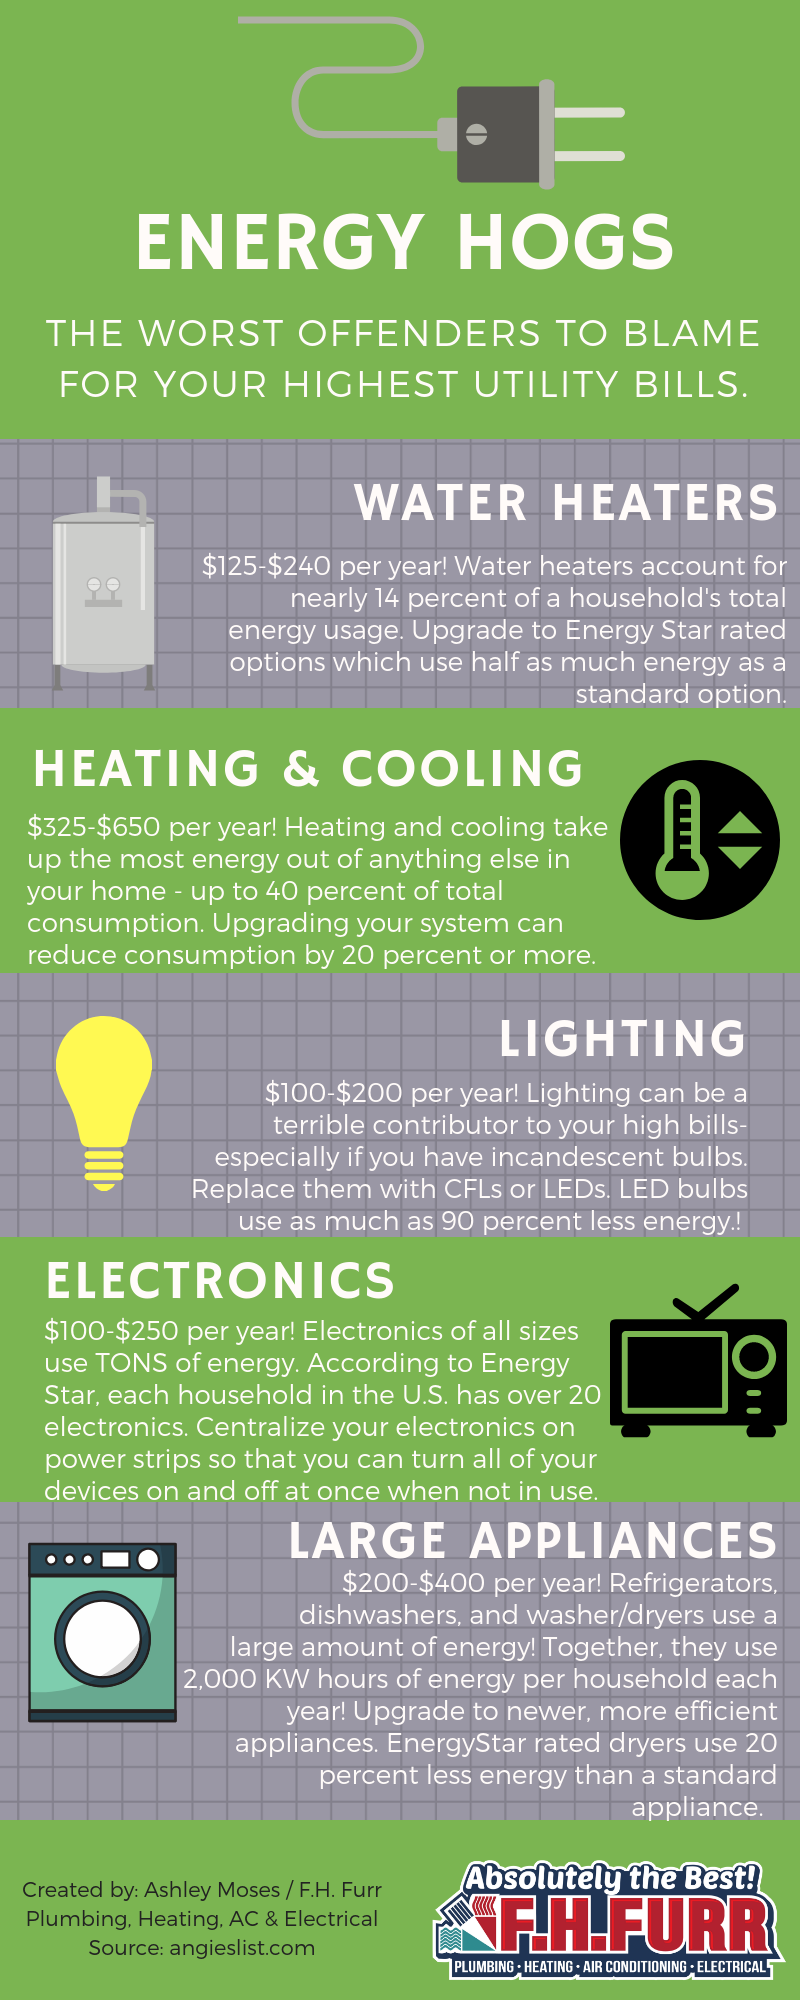 Infographic about household energy hogs: Water heaters, HVAC, lighting, electronics, large appliances.